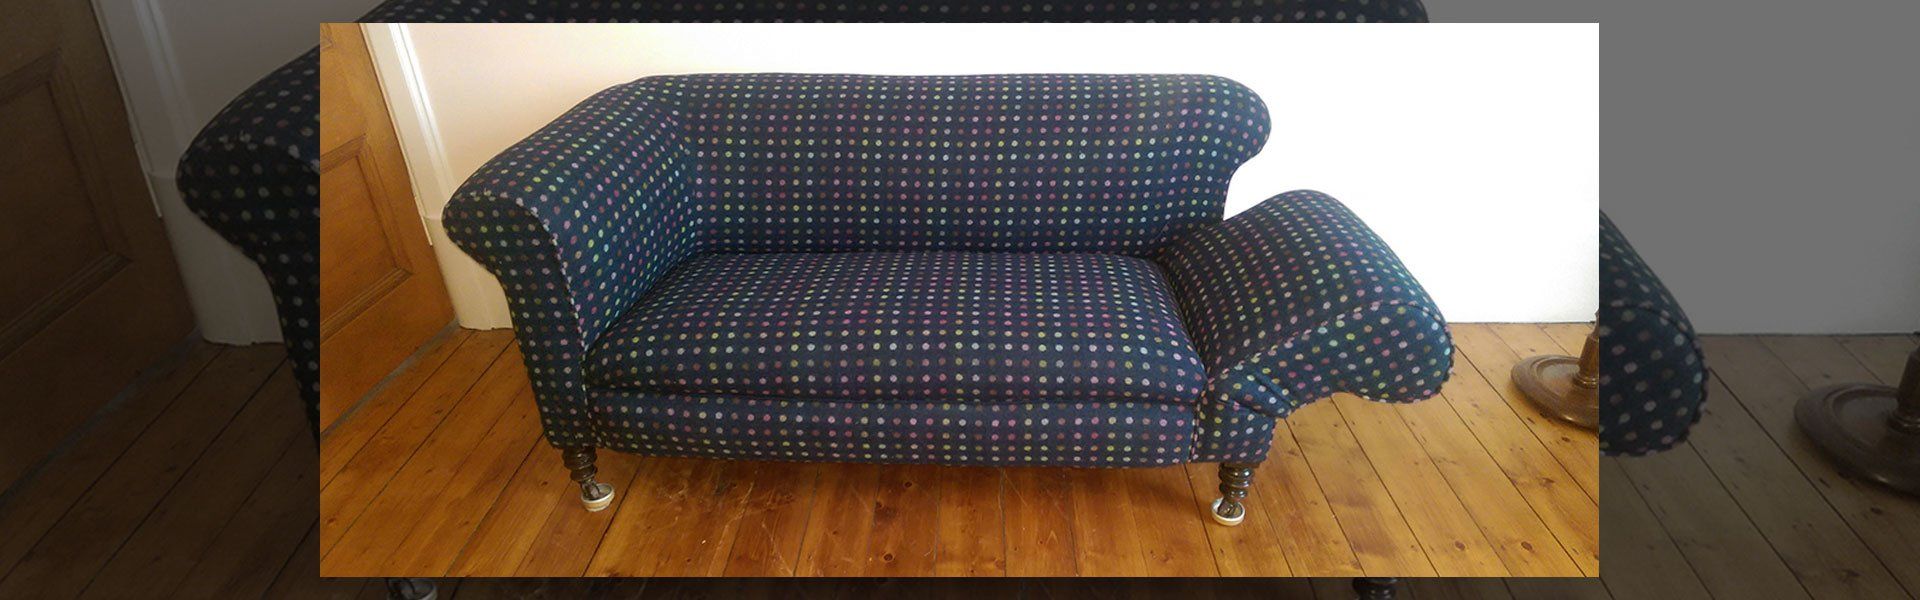 Contact the professional upholsters at Troon Upholstery Service